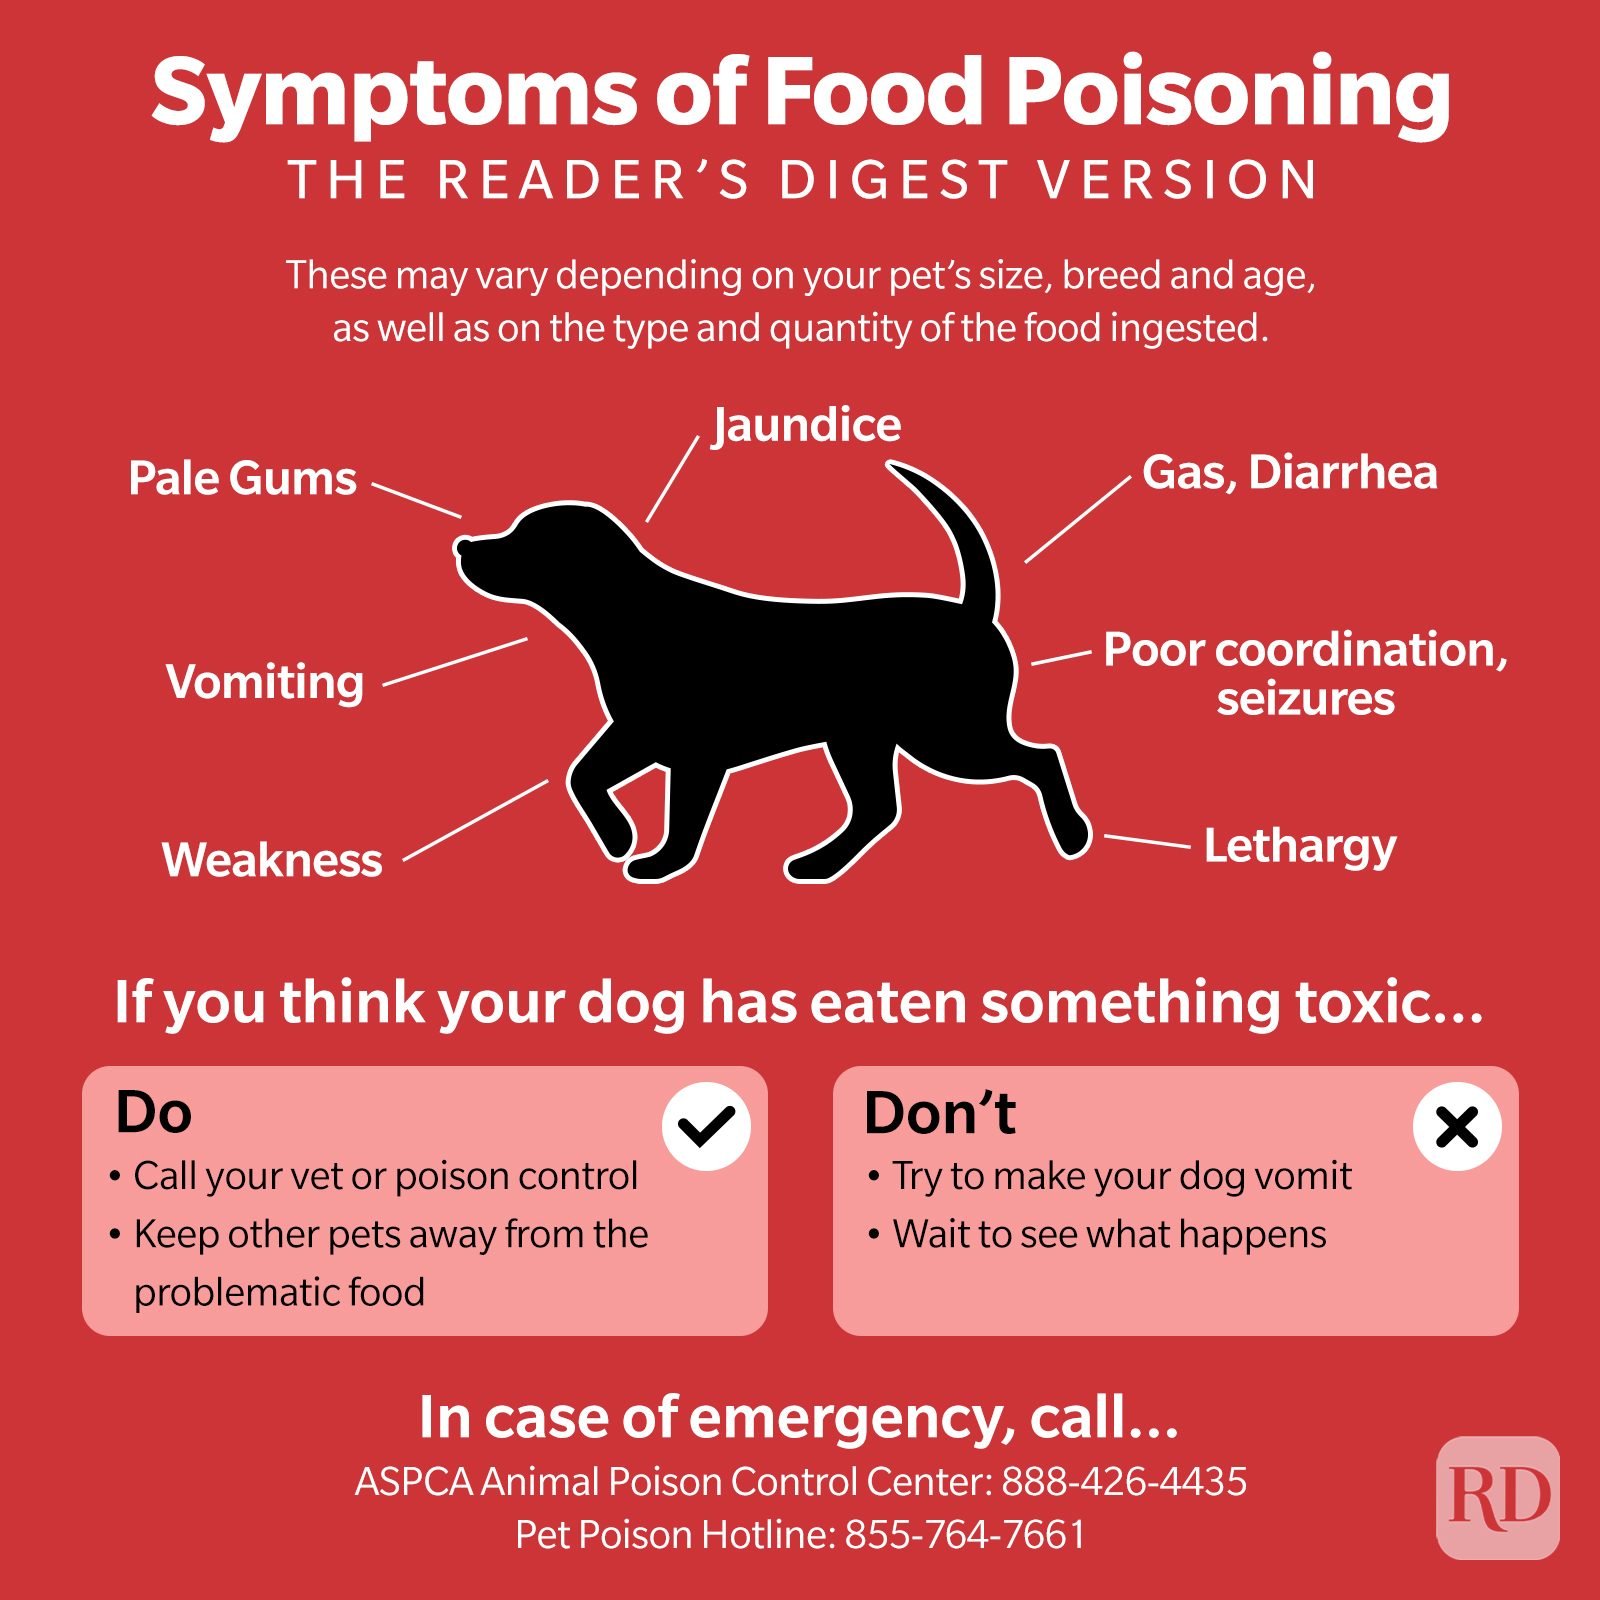 18 Foods Dogs Can't Eat — Toxic Foods for Dogs to Avoid